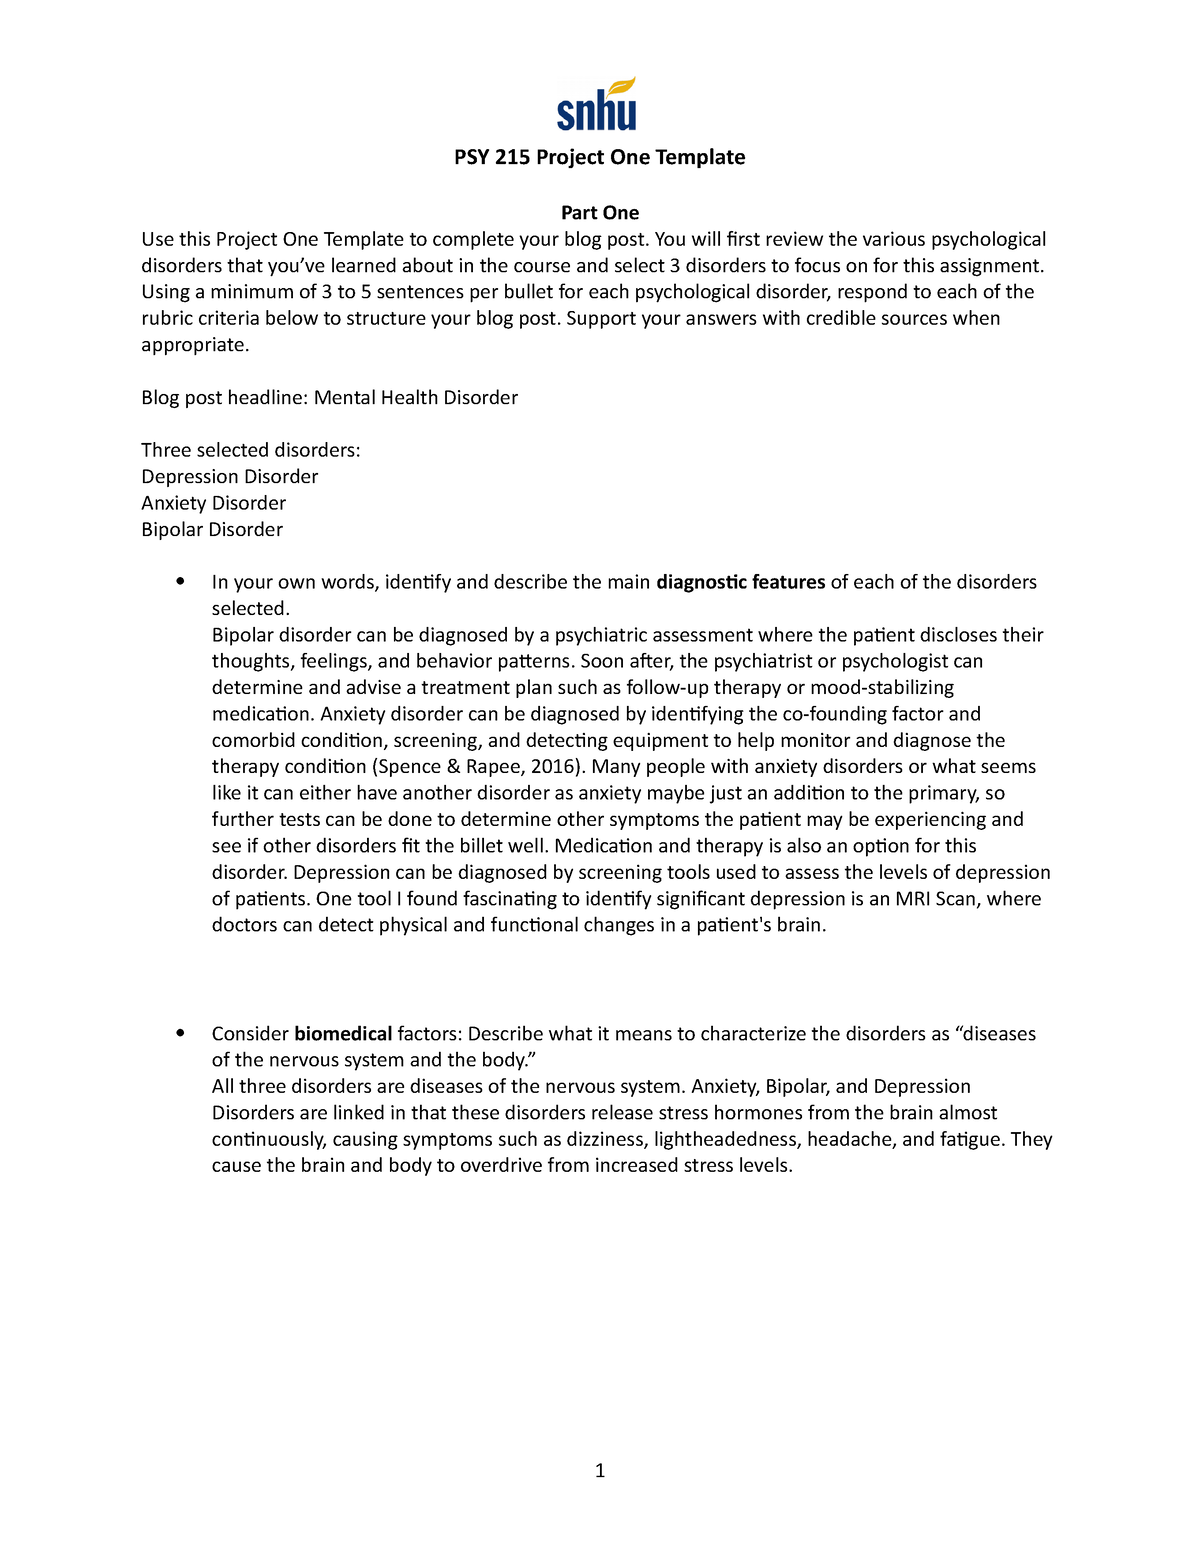 PSY 215 Project One PSY 215 Module Three Activity Template PSY 215